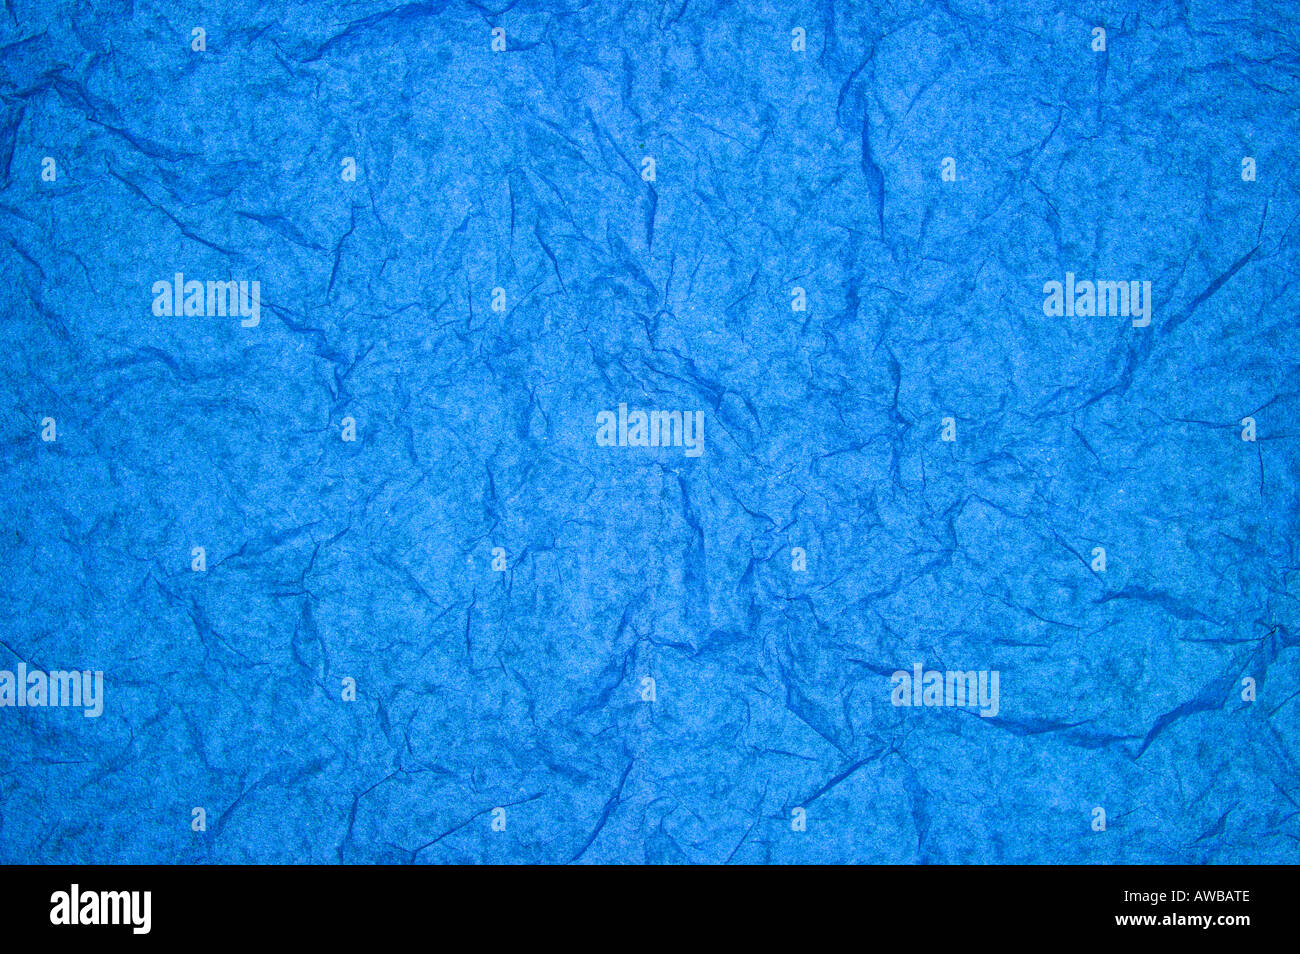 ABSTRACT RANDOM BACKGROUND OF CREASED CRUMPLED BRIGHT BLUE TISSUE PAPER Stock Photo